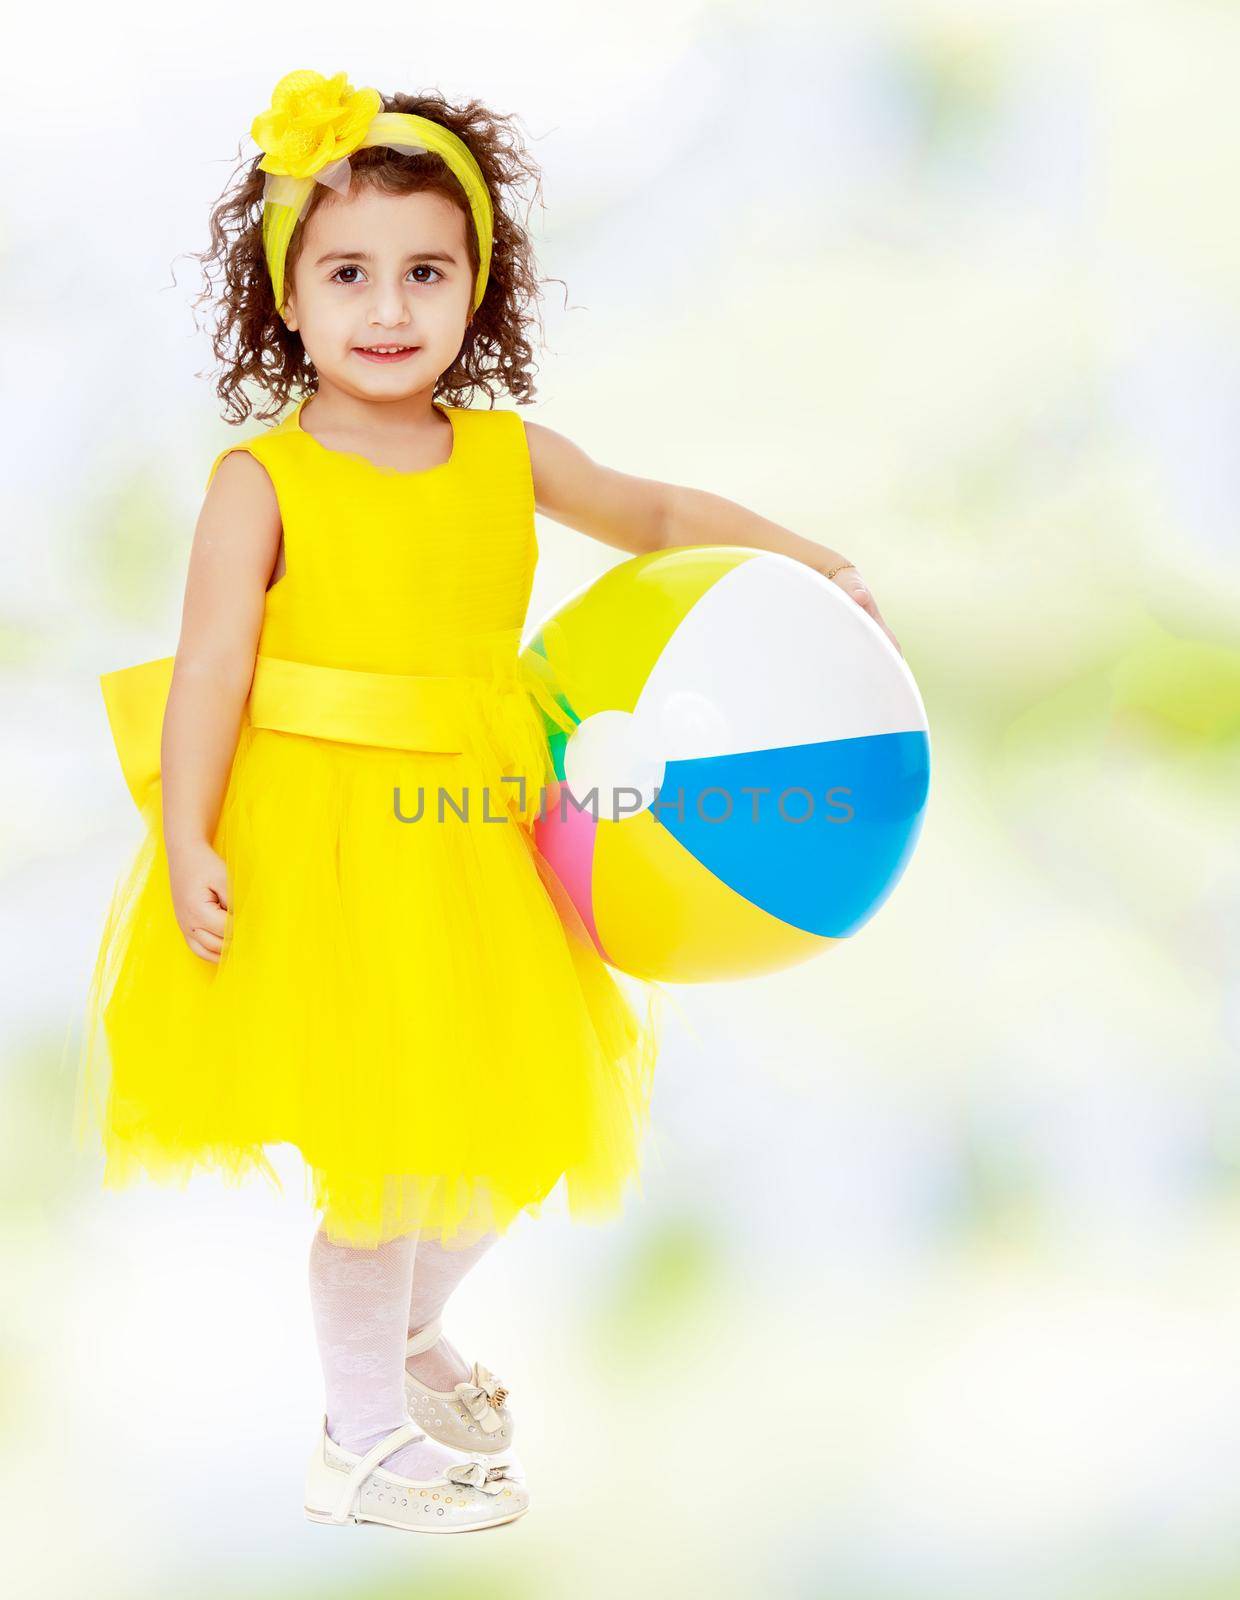 Cute curly girl in a bright yellow dress and bow on her head holding the ball. Close-up.white-green blurred abstract background with snowflakes.